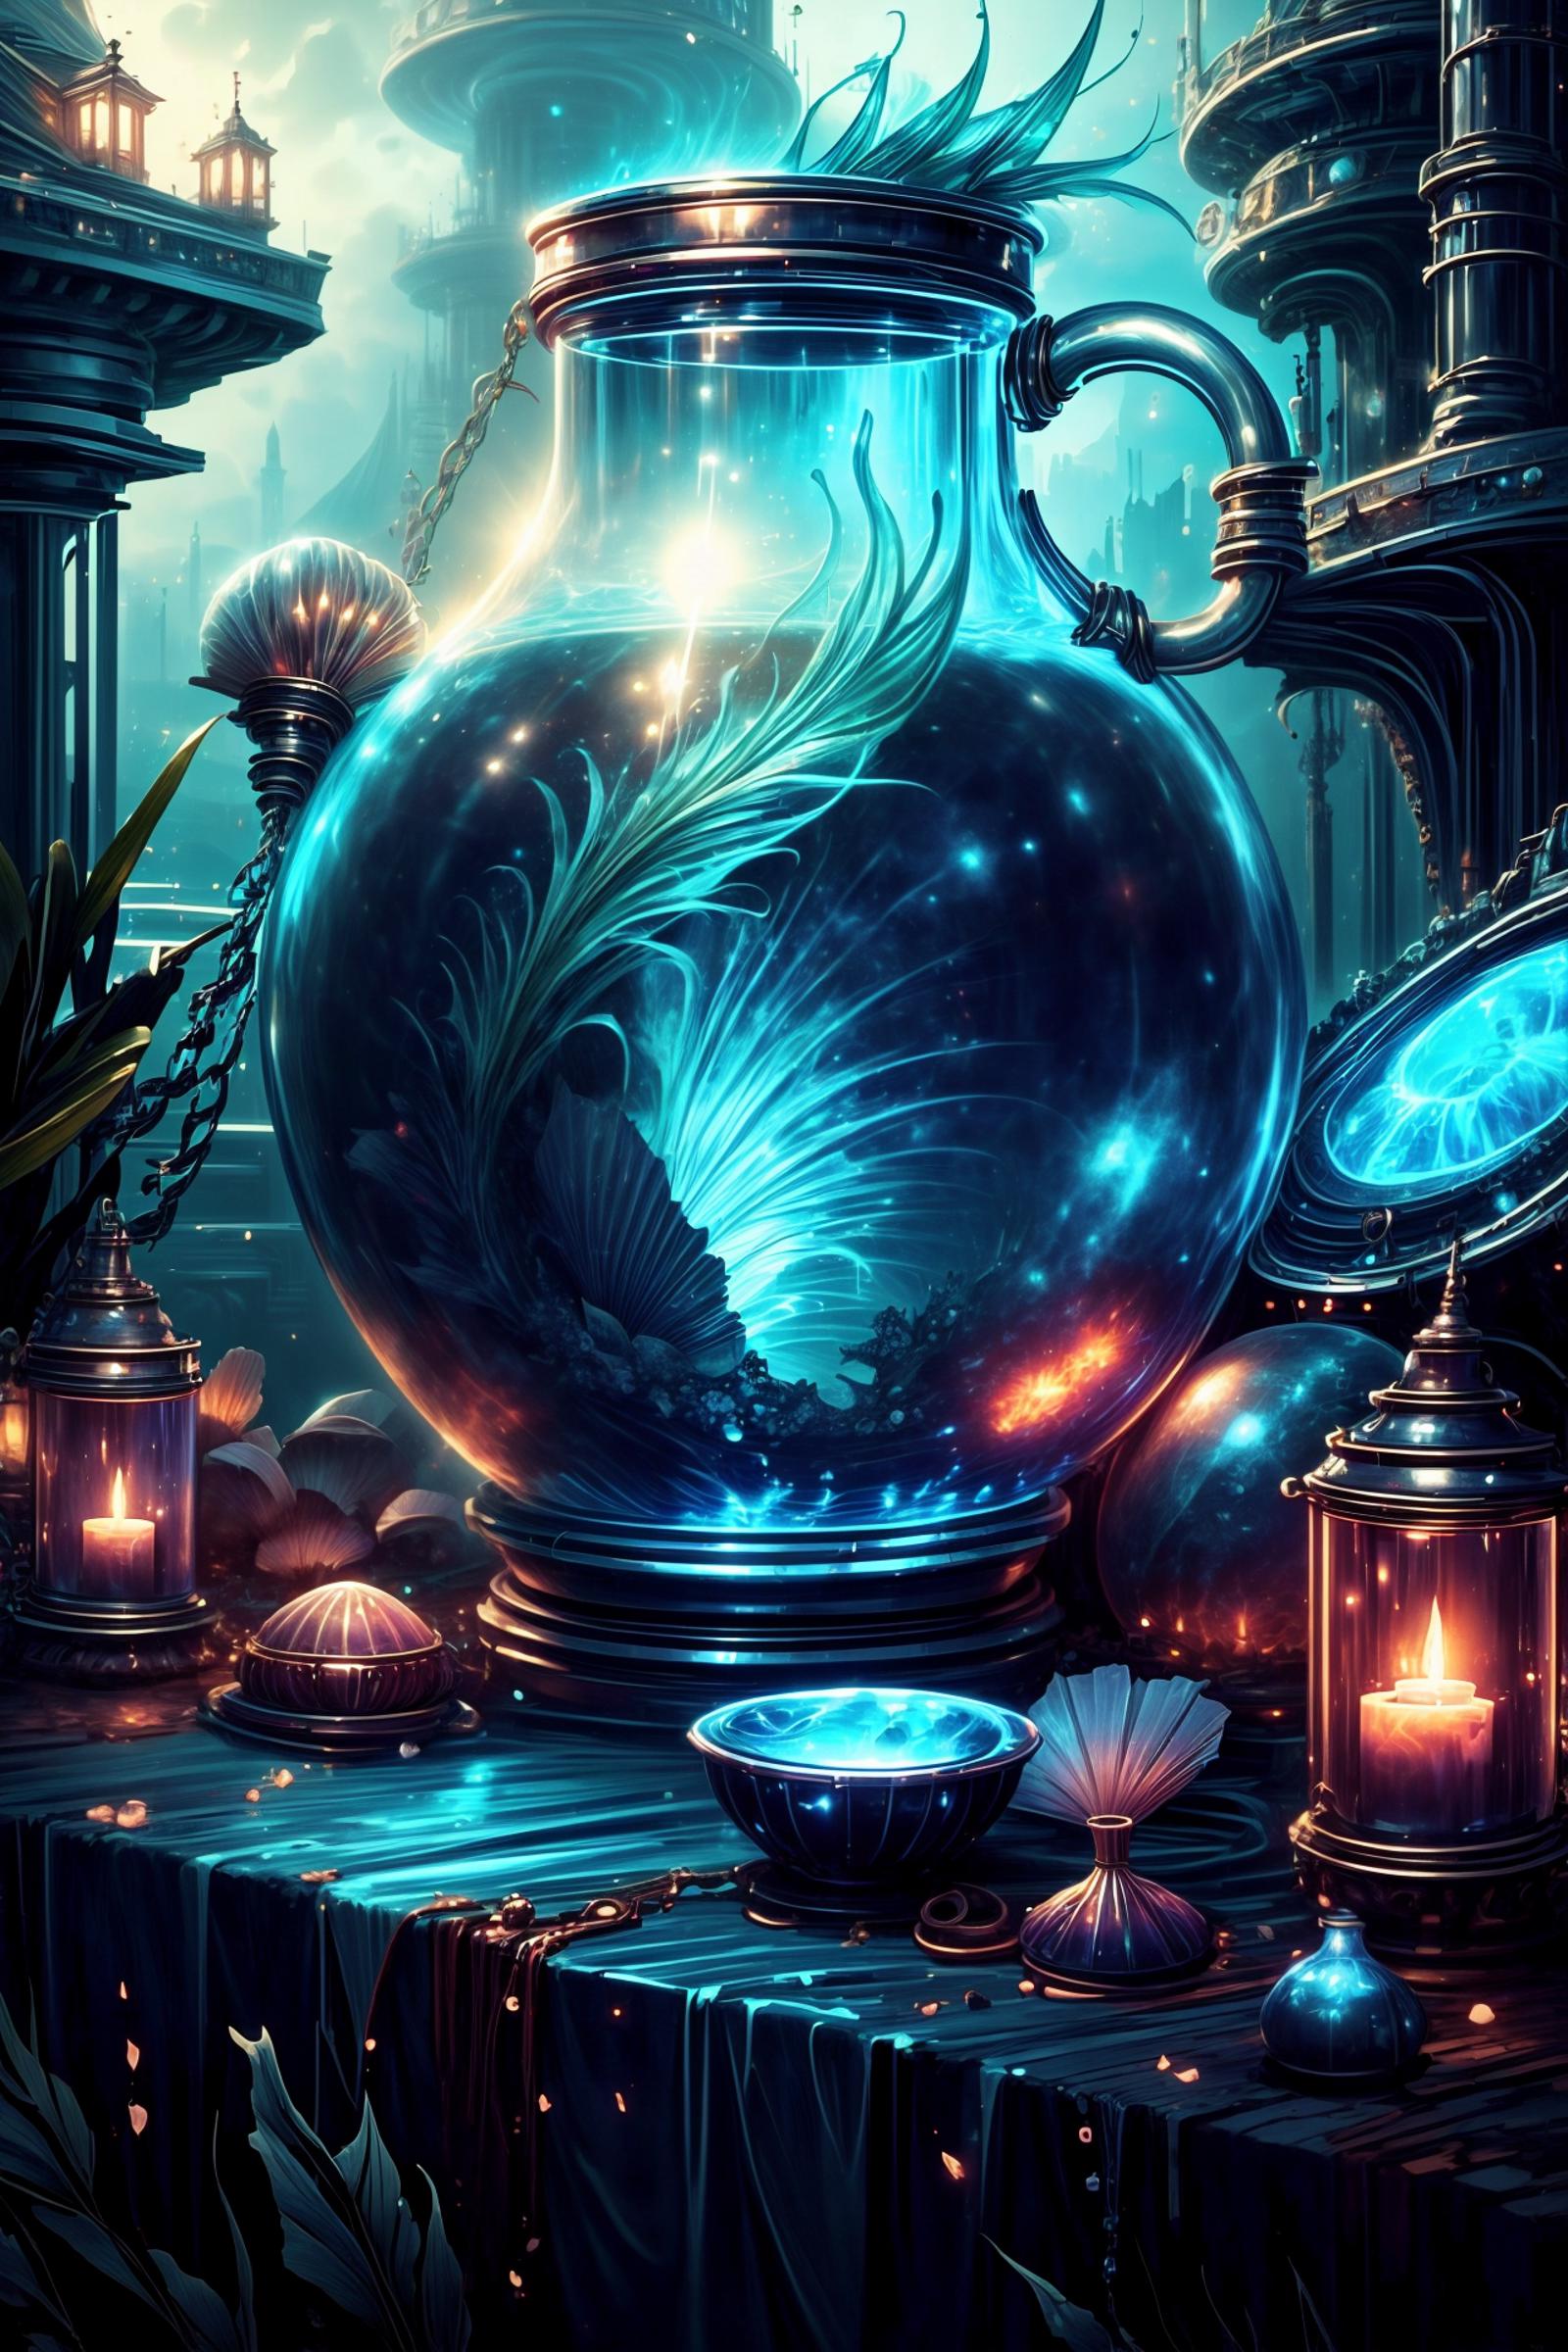 Fantasy Art of a Blue Vase with a Fish Inside and Glowing Light